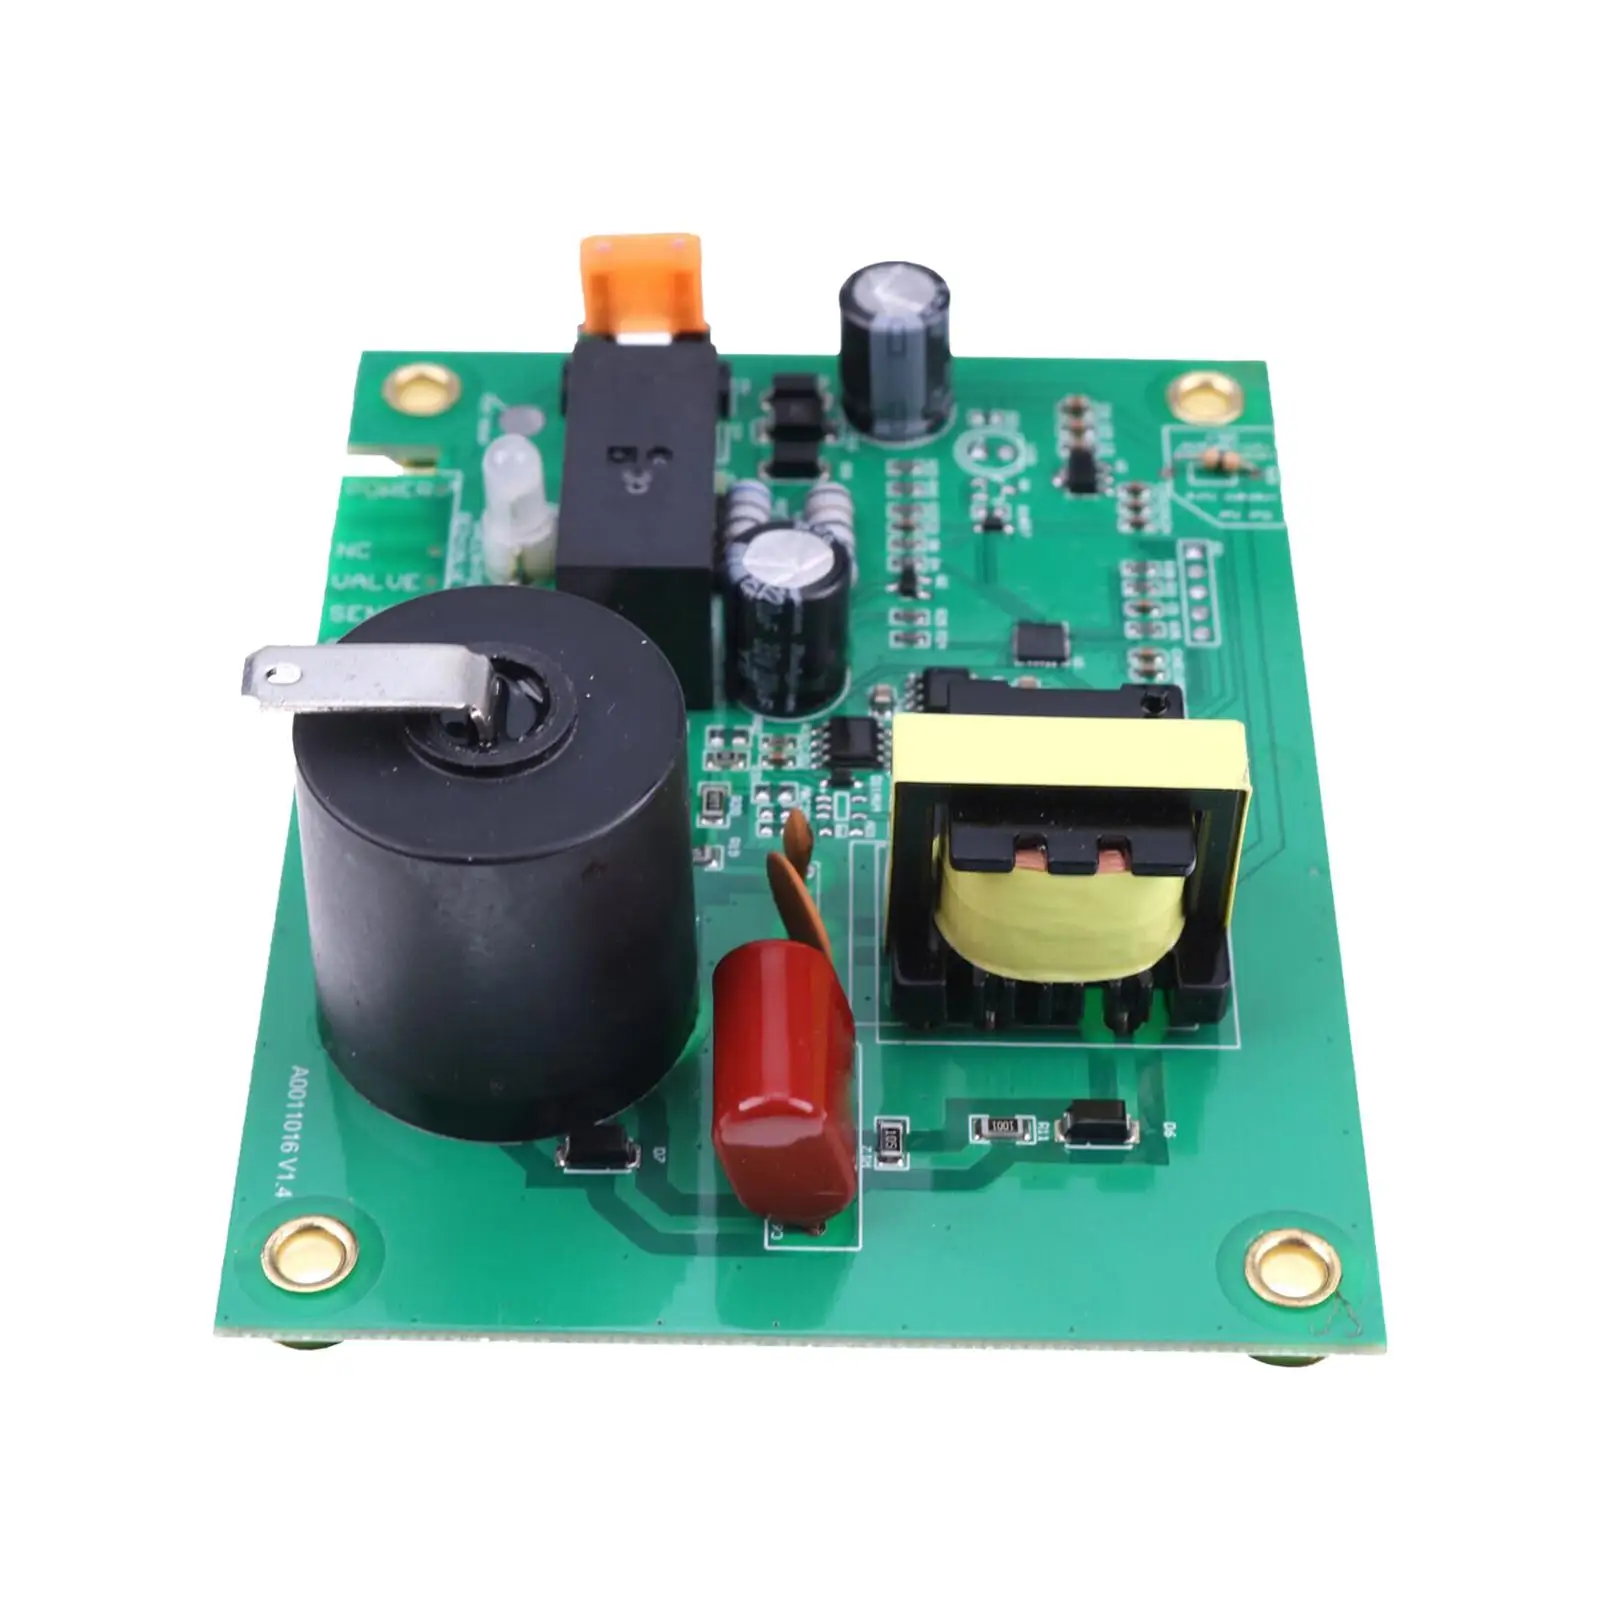 Ignition Board Uib S 12 Volt DC Water Heater Control Circuit Board Replacement Electronics Accessories Durable Easy Installation